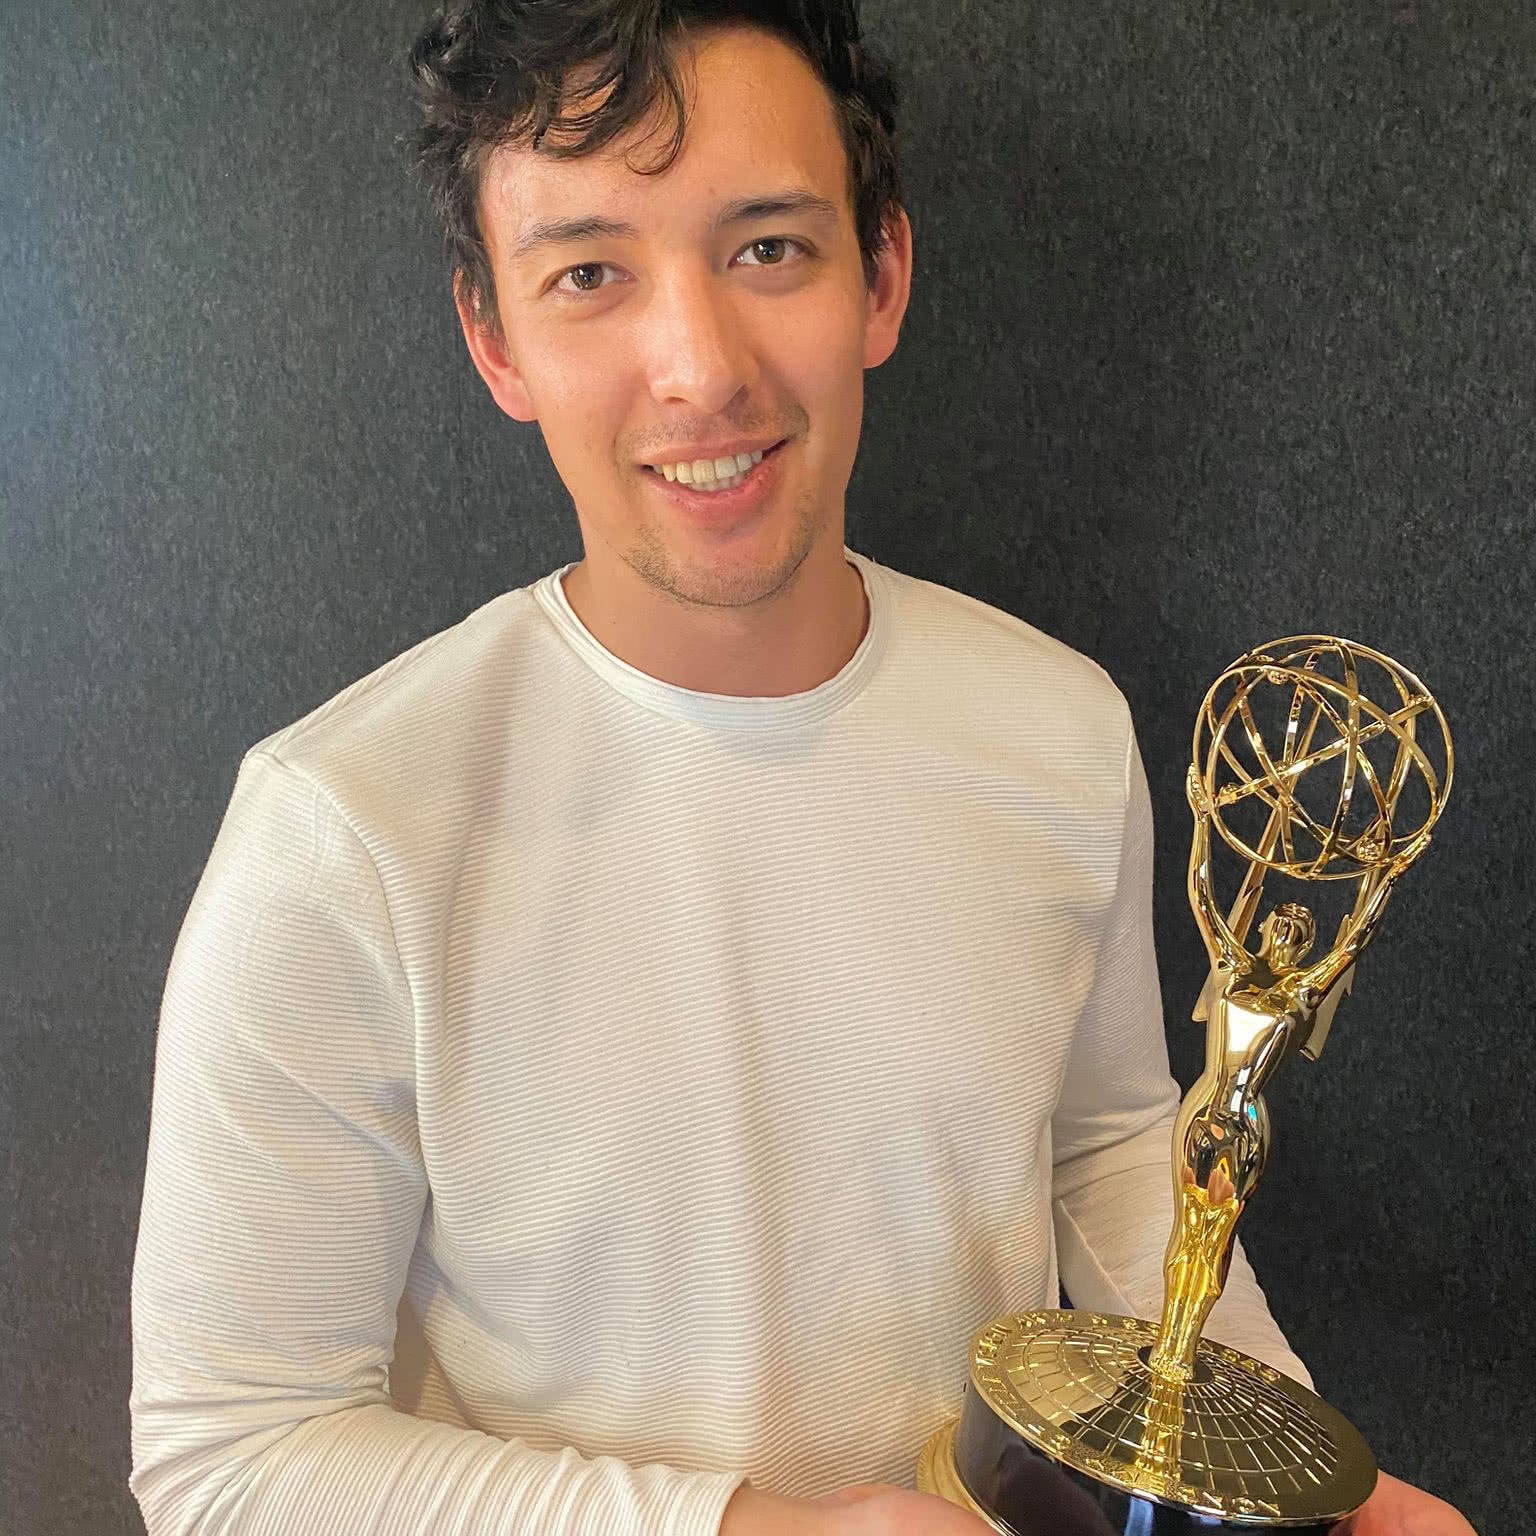 Ciel with his emmy